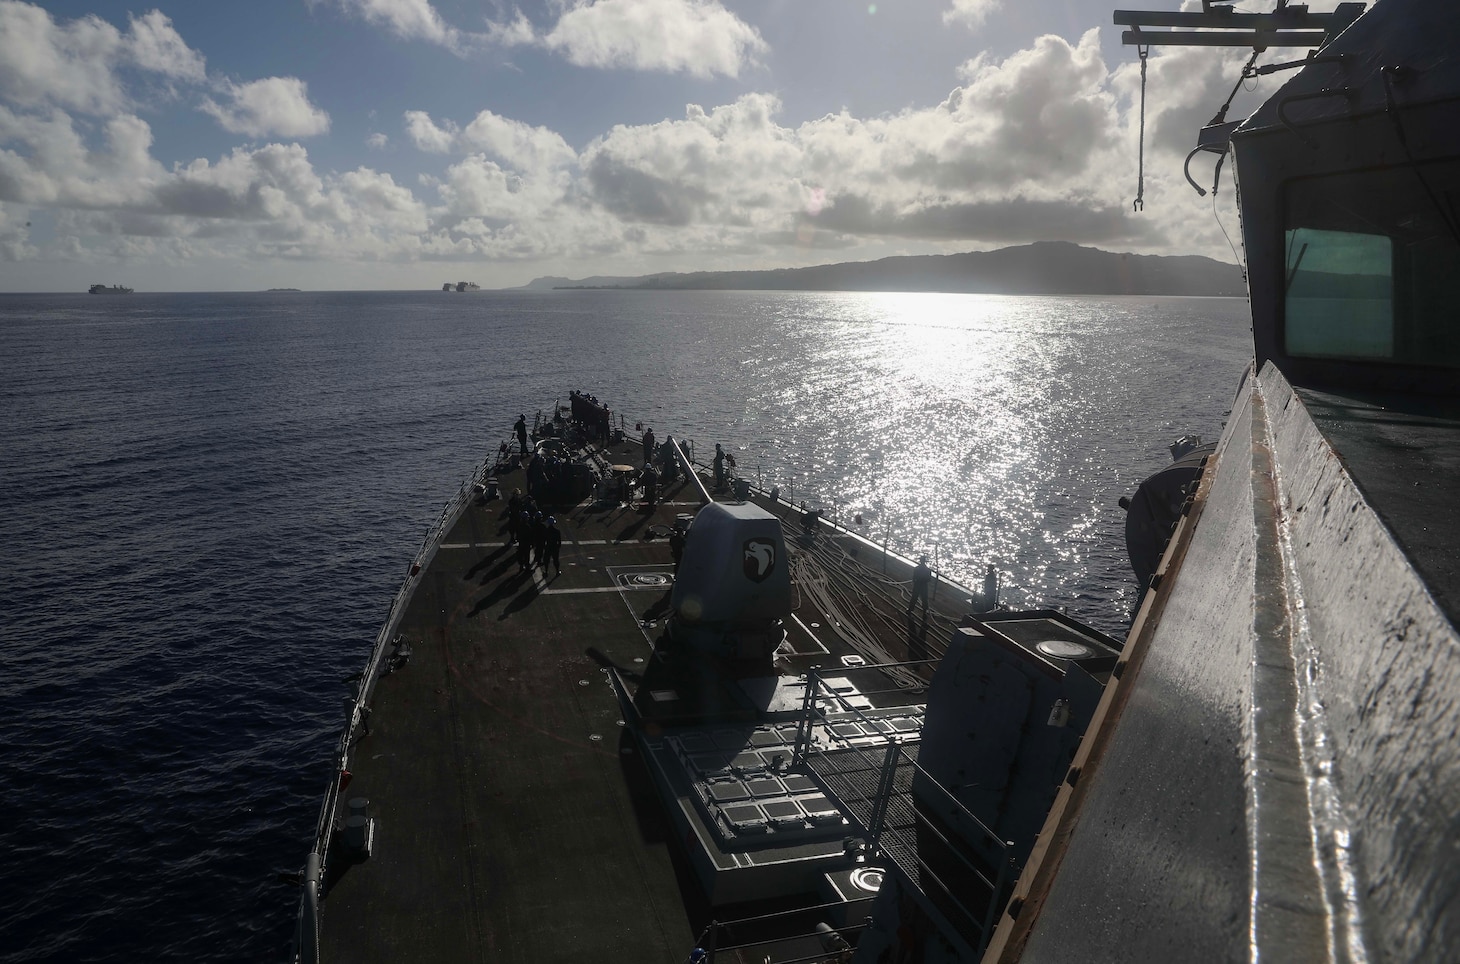 The Arleigh Burke-class guided-missile destroyer USS Milius (DDG 69) arrives in Saipan for a scheduled port visit. Milius is assigned to Commander, Task Force 71/Destroyer Squadron (DESRON) 15, the Navy’s largest forward-deployed DESRON and the U.S. 7th Fleet’s principal surface force.